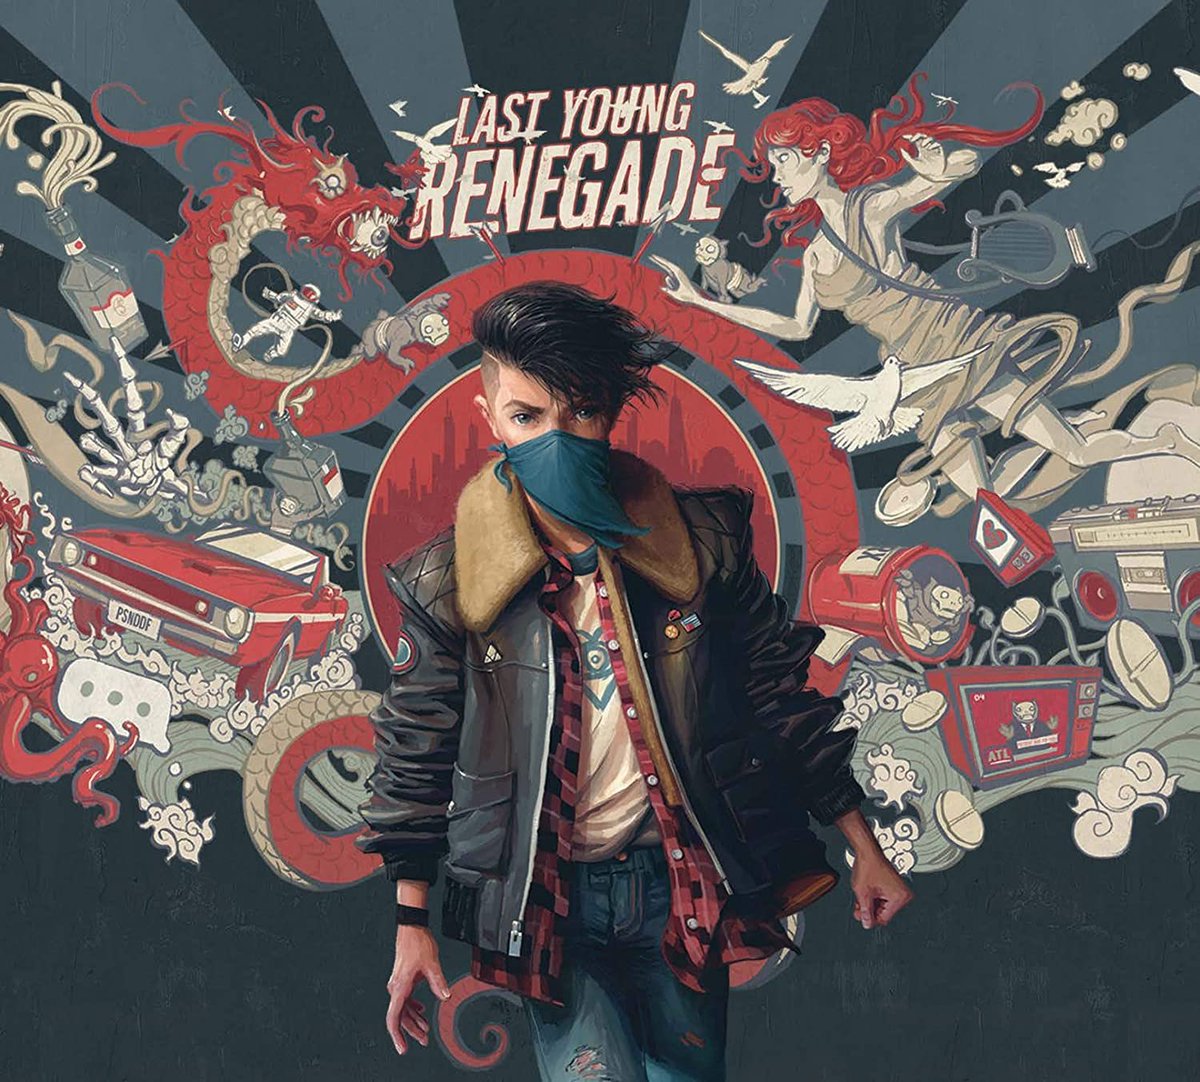 last young renegade —  @AllTimeLow